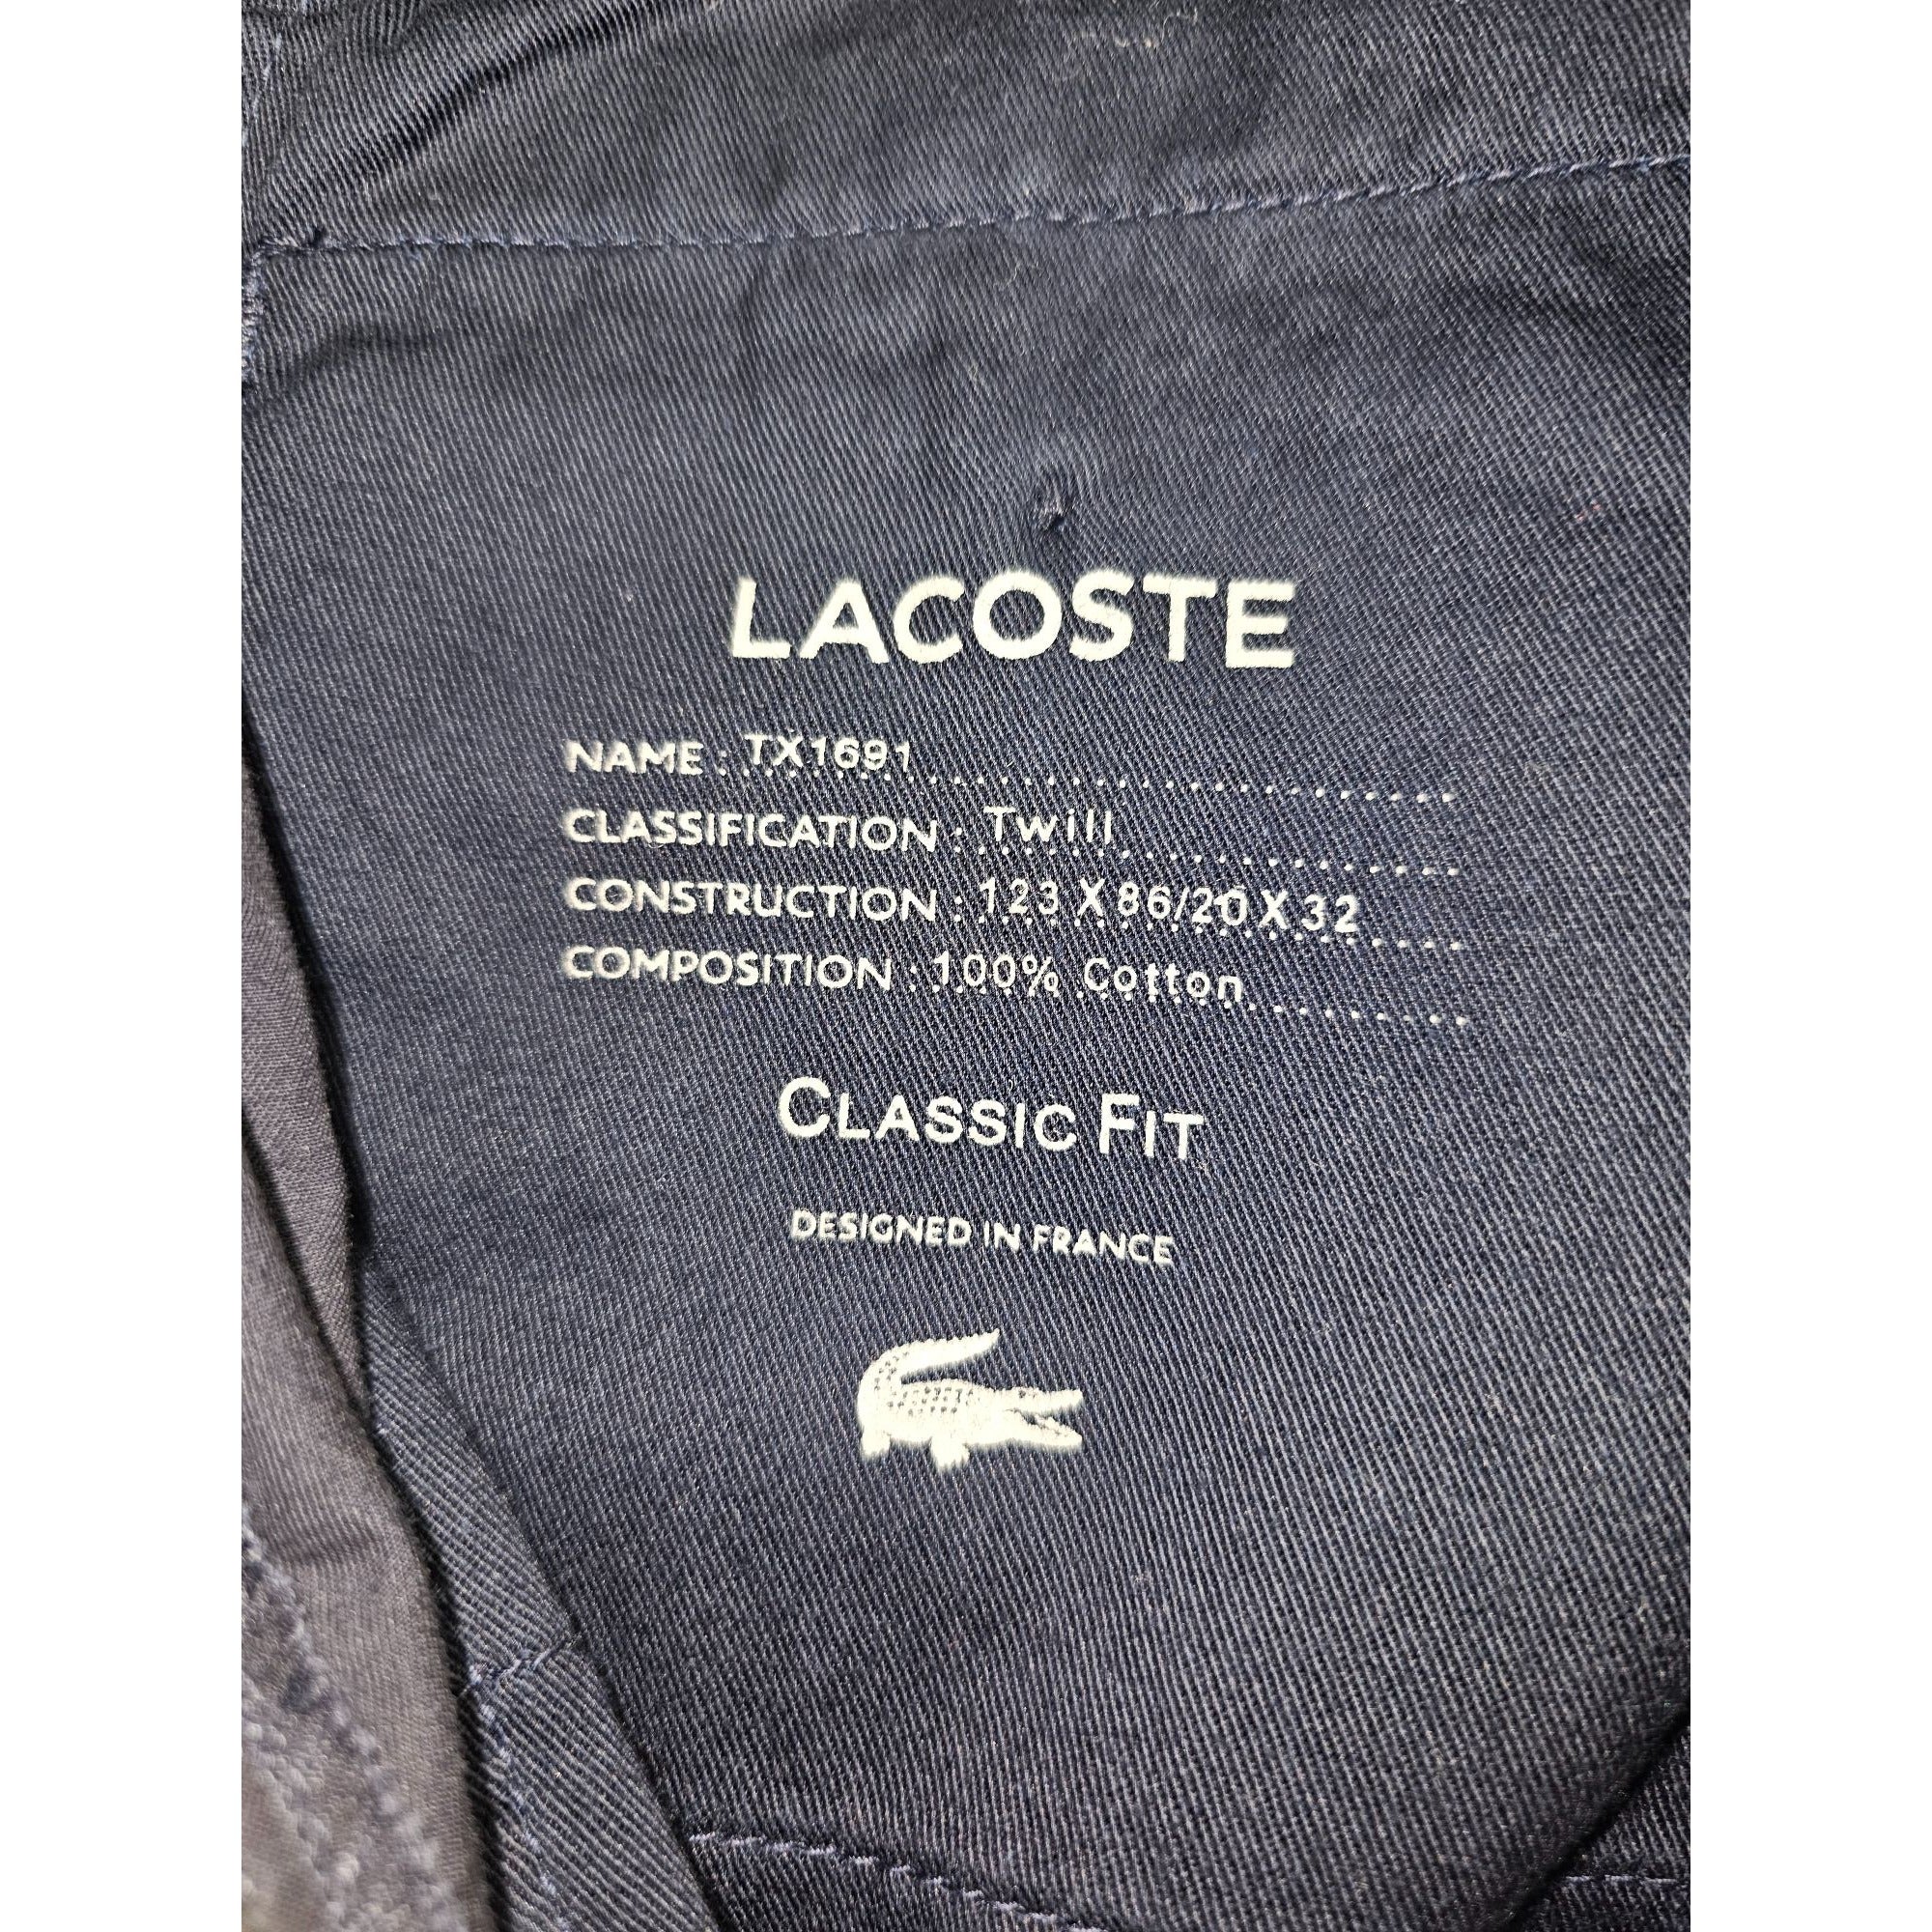 Lacoste Dark Navy Blue Chino Casual Regular Fit Men's Shorts, Size 40